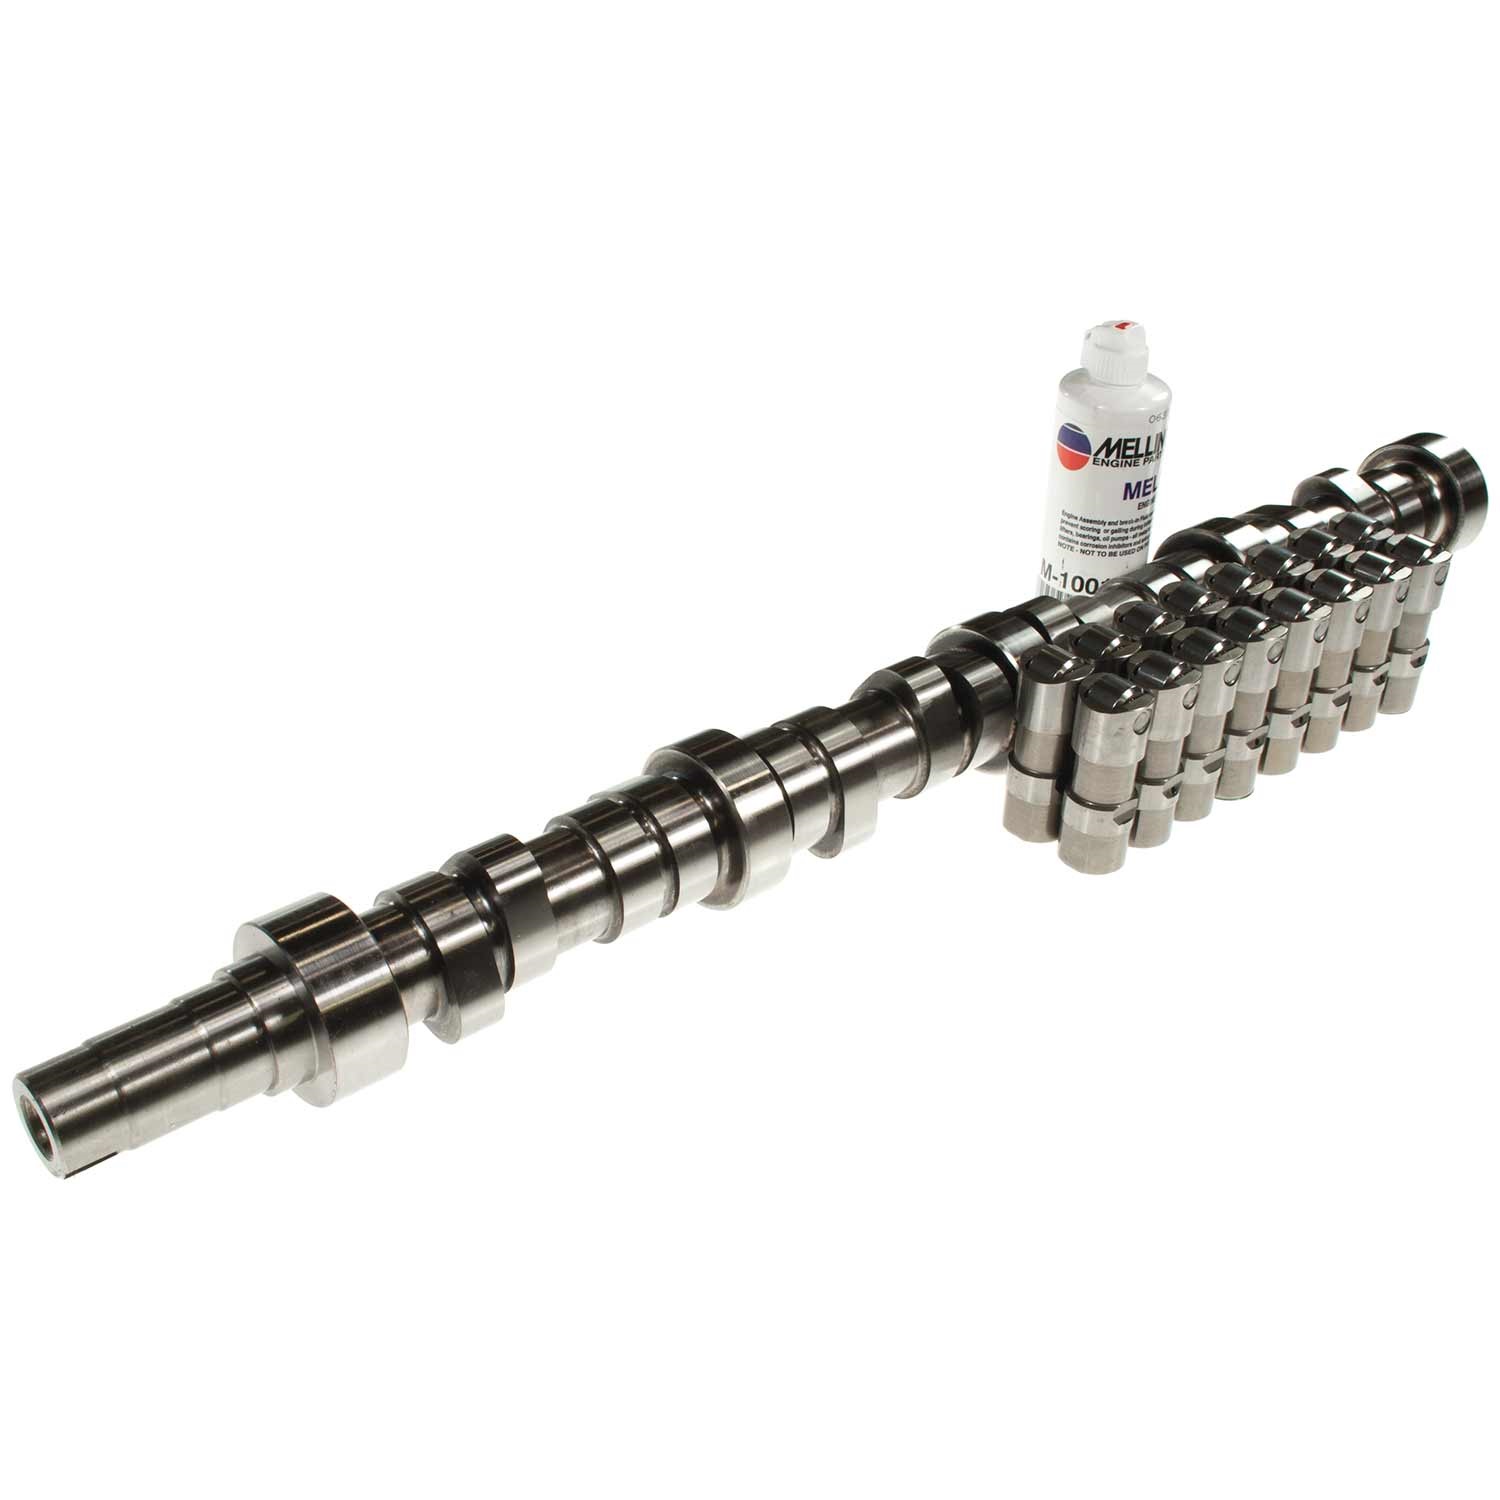 Camshaft and Lifter Kit for 1983-1994 Ford 6.9L, 7.3L Engines